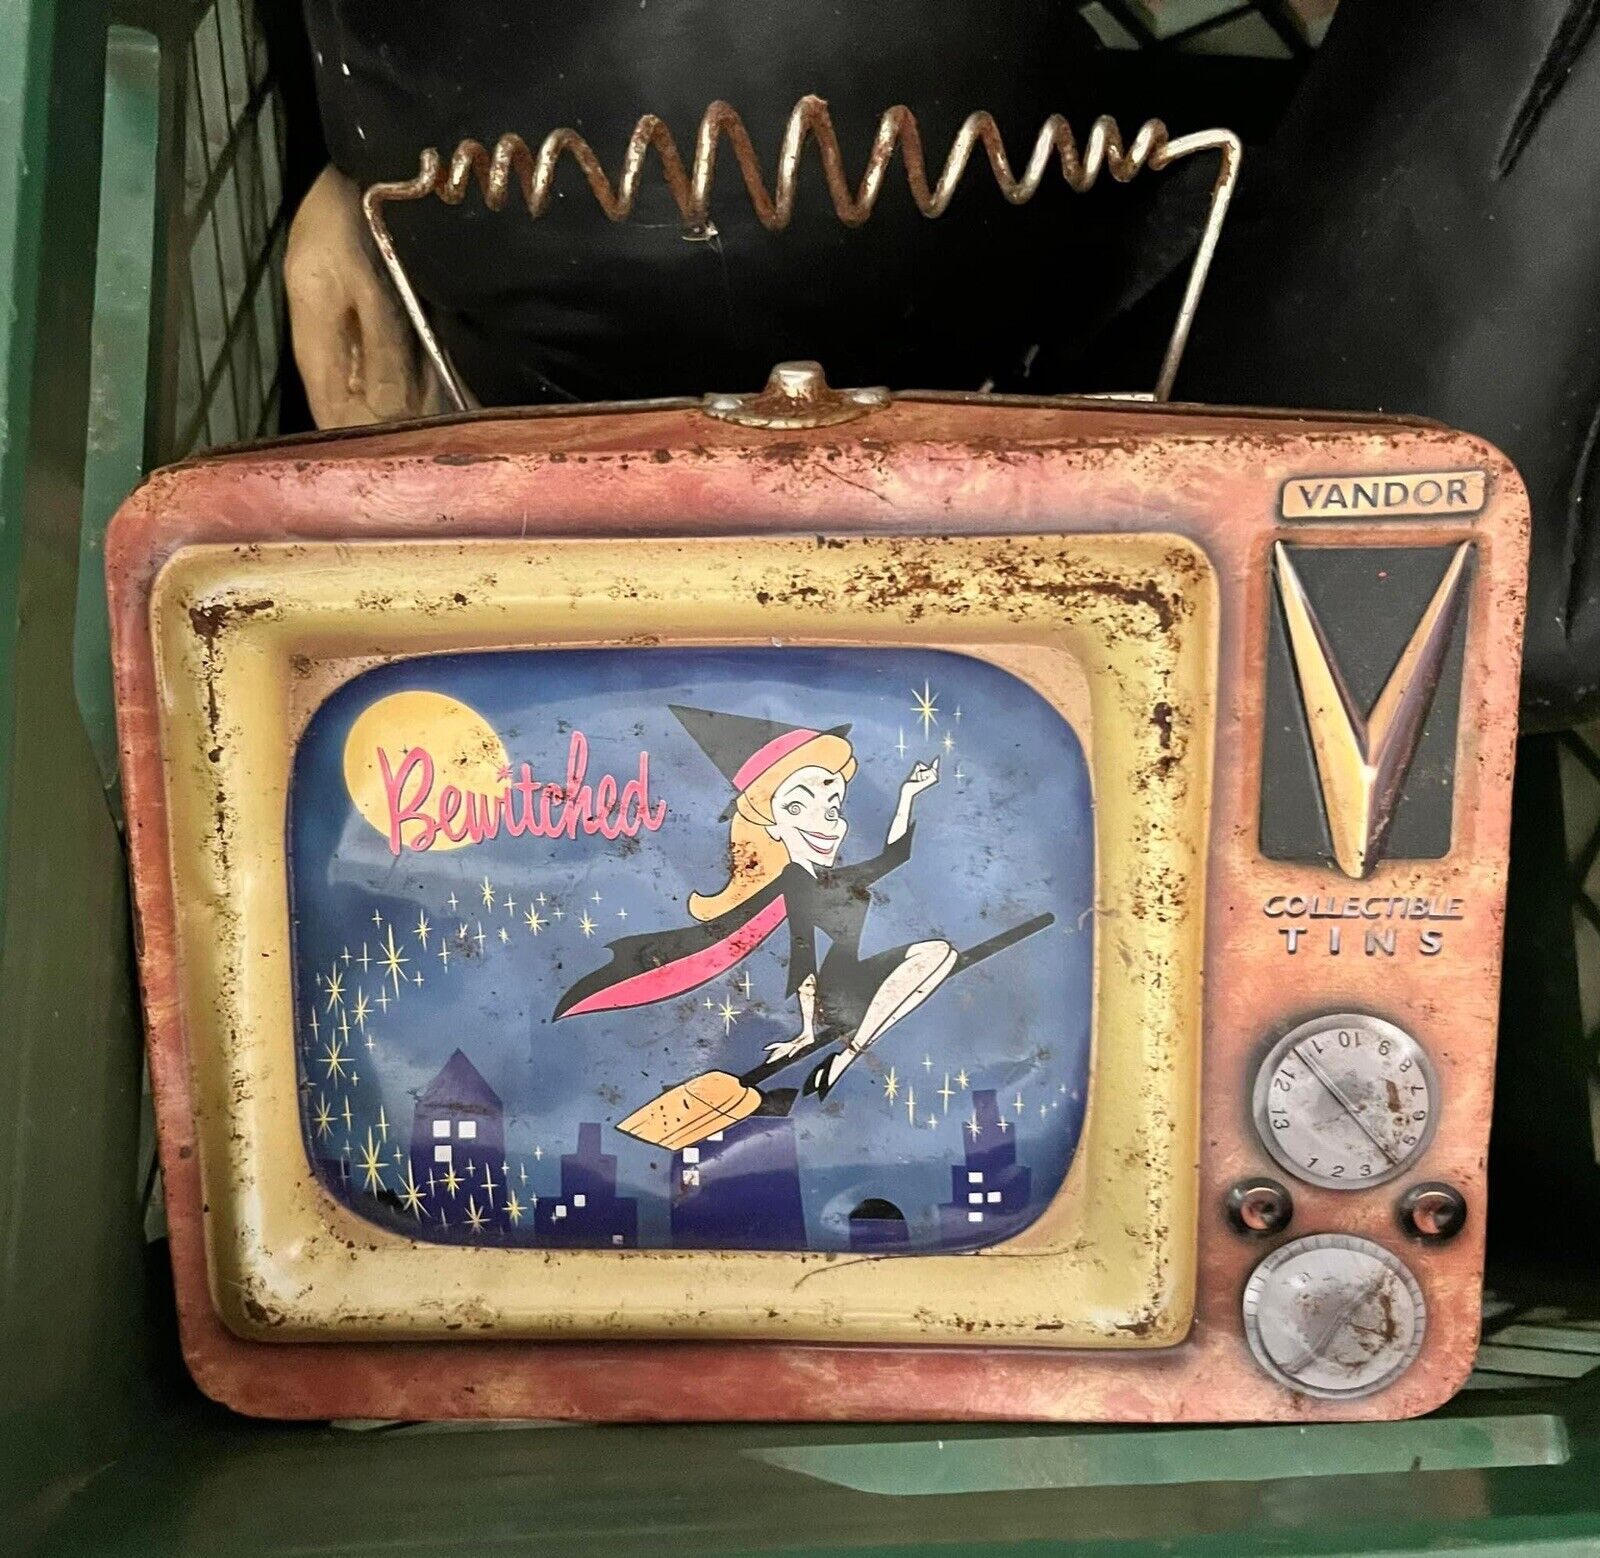 Vintage Bewitched Collectible Tin Lunch Box w/ antenna handle By Vandor 1999